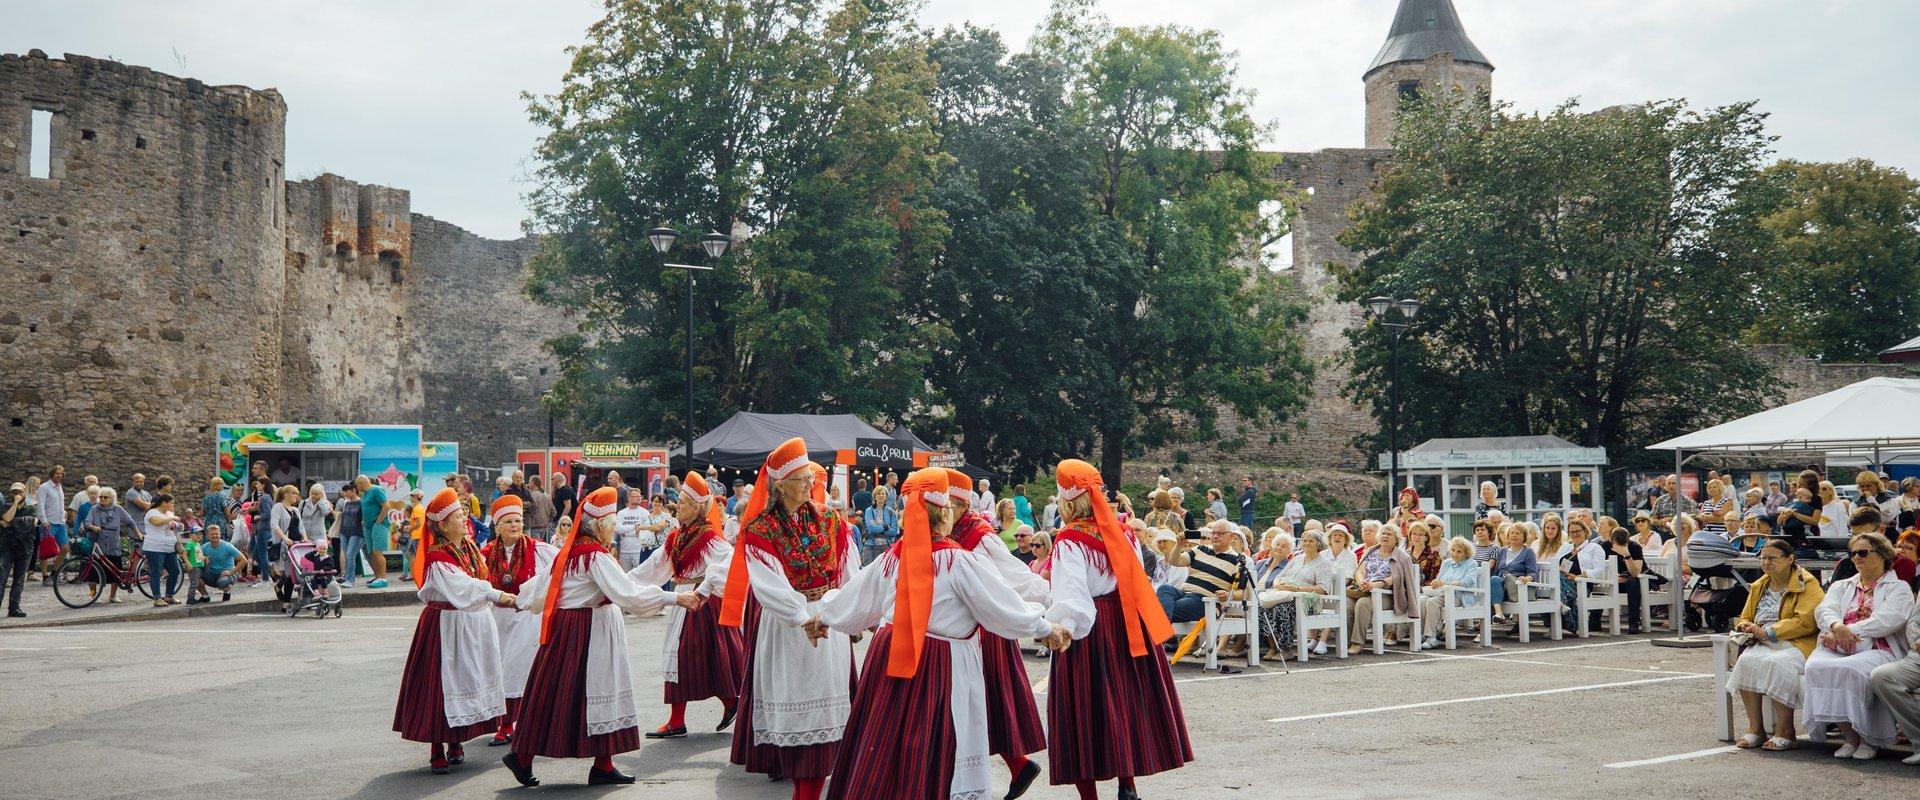 The White Lady Festival has been one of the highlights of the summer in Haapsalu for three decades. During the weekend closest to the August full moon